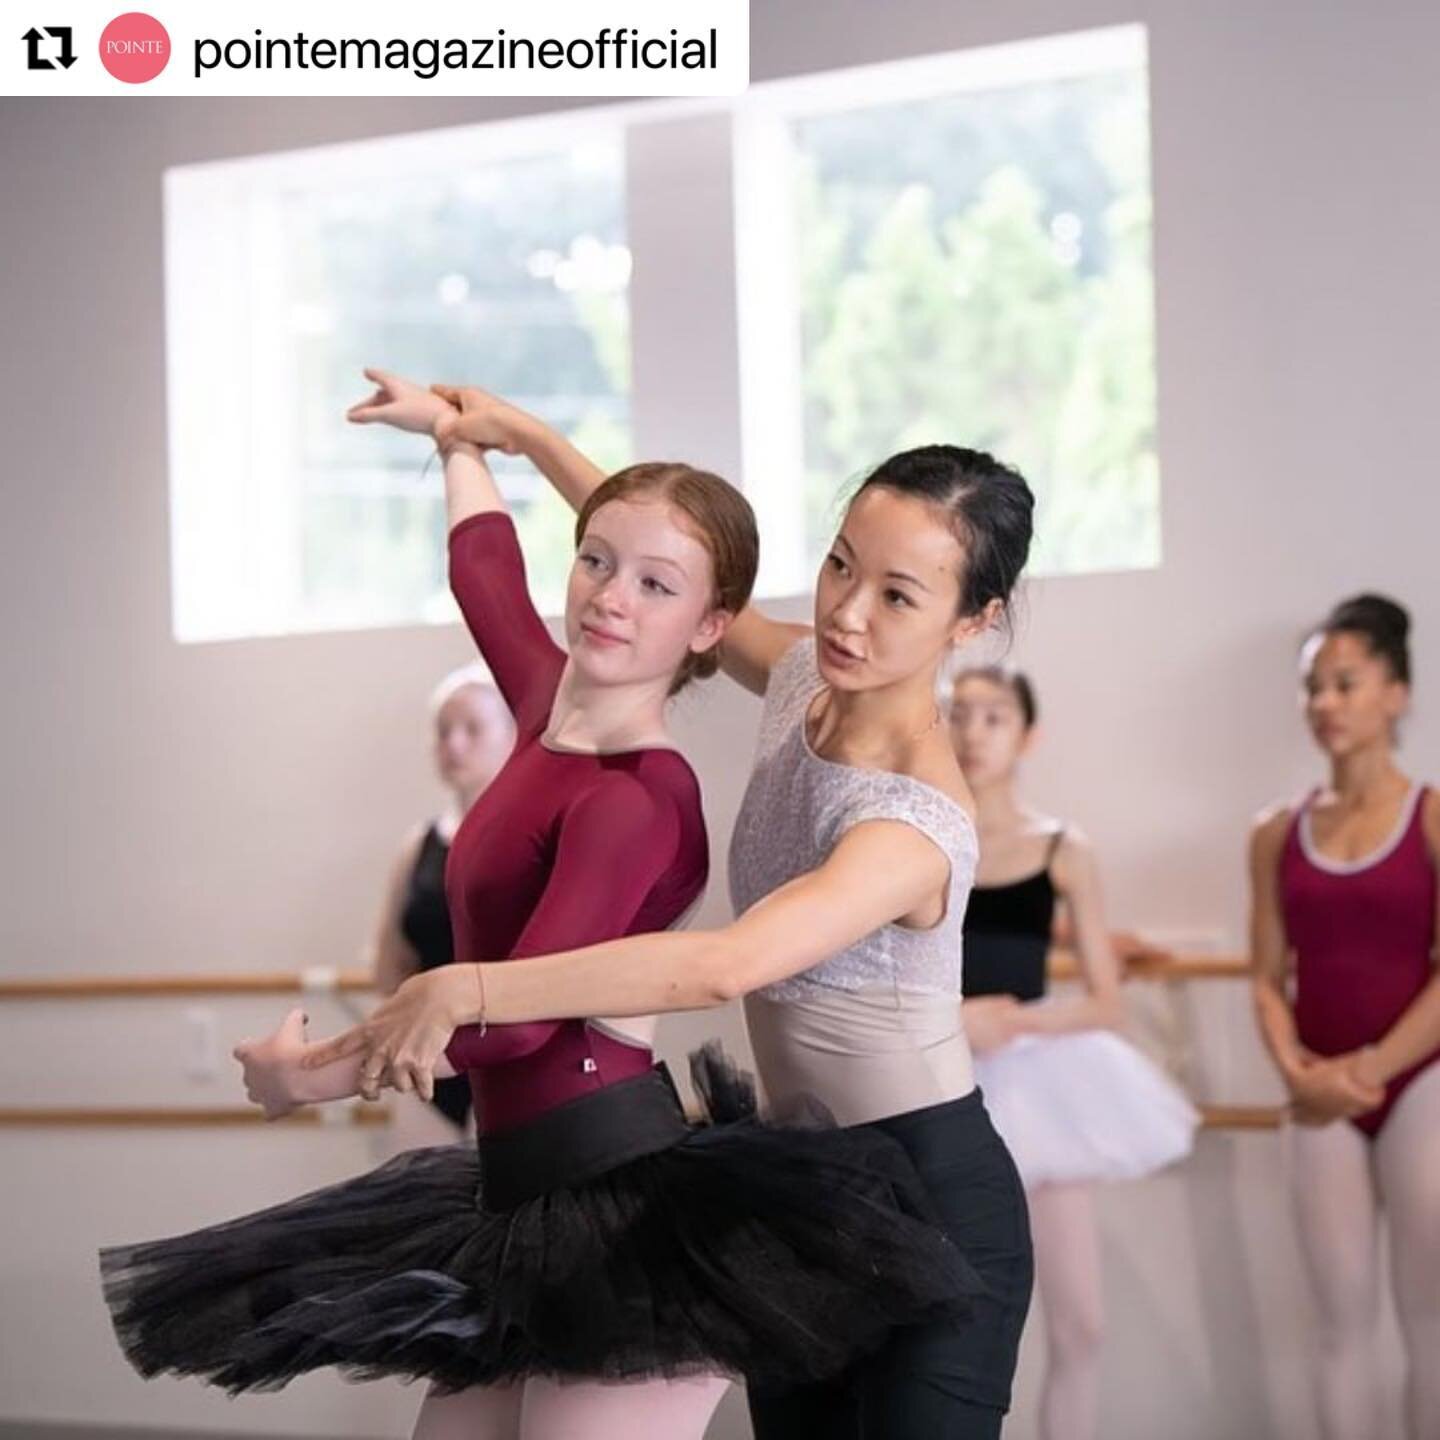 #Repost @pointemagazineofficial with @use.repost
・・・
Xuan Cheng&rsquo;s (@chengxuan119) resum&eacute; is an impressive list of competitions, companies and roles. But beyond her laudable accomplishments is a tenacious dancer whose curiosity to see the